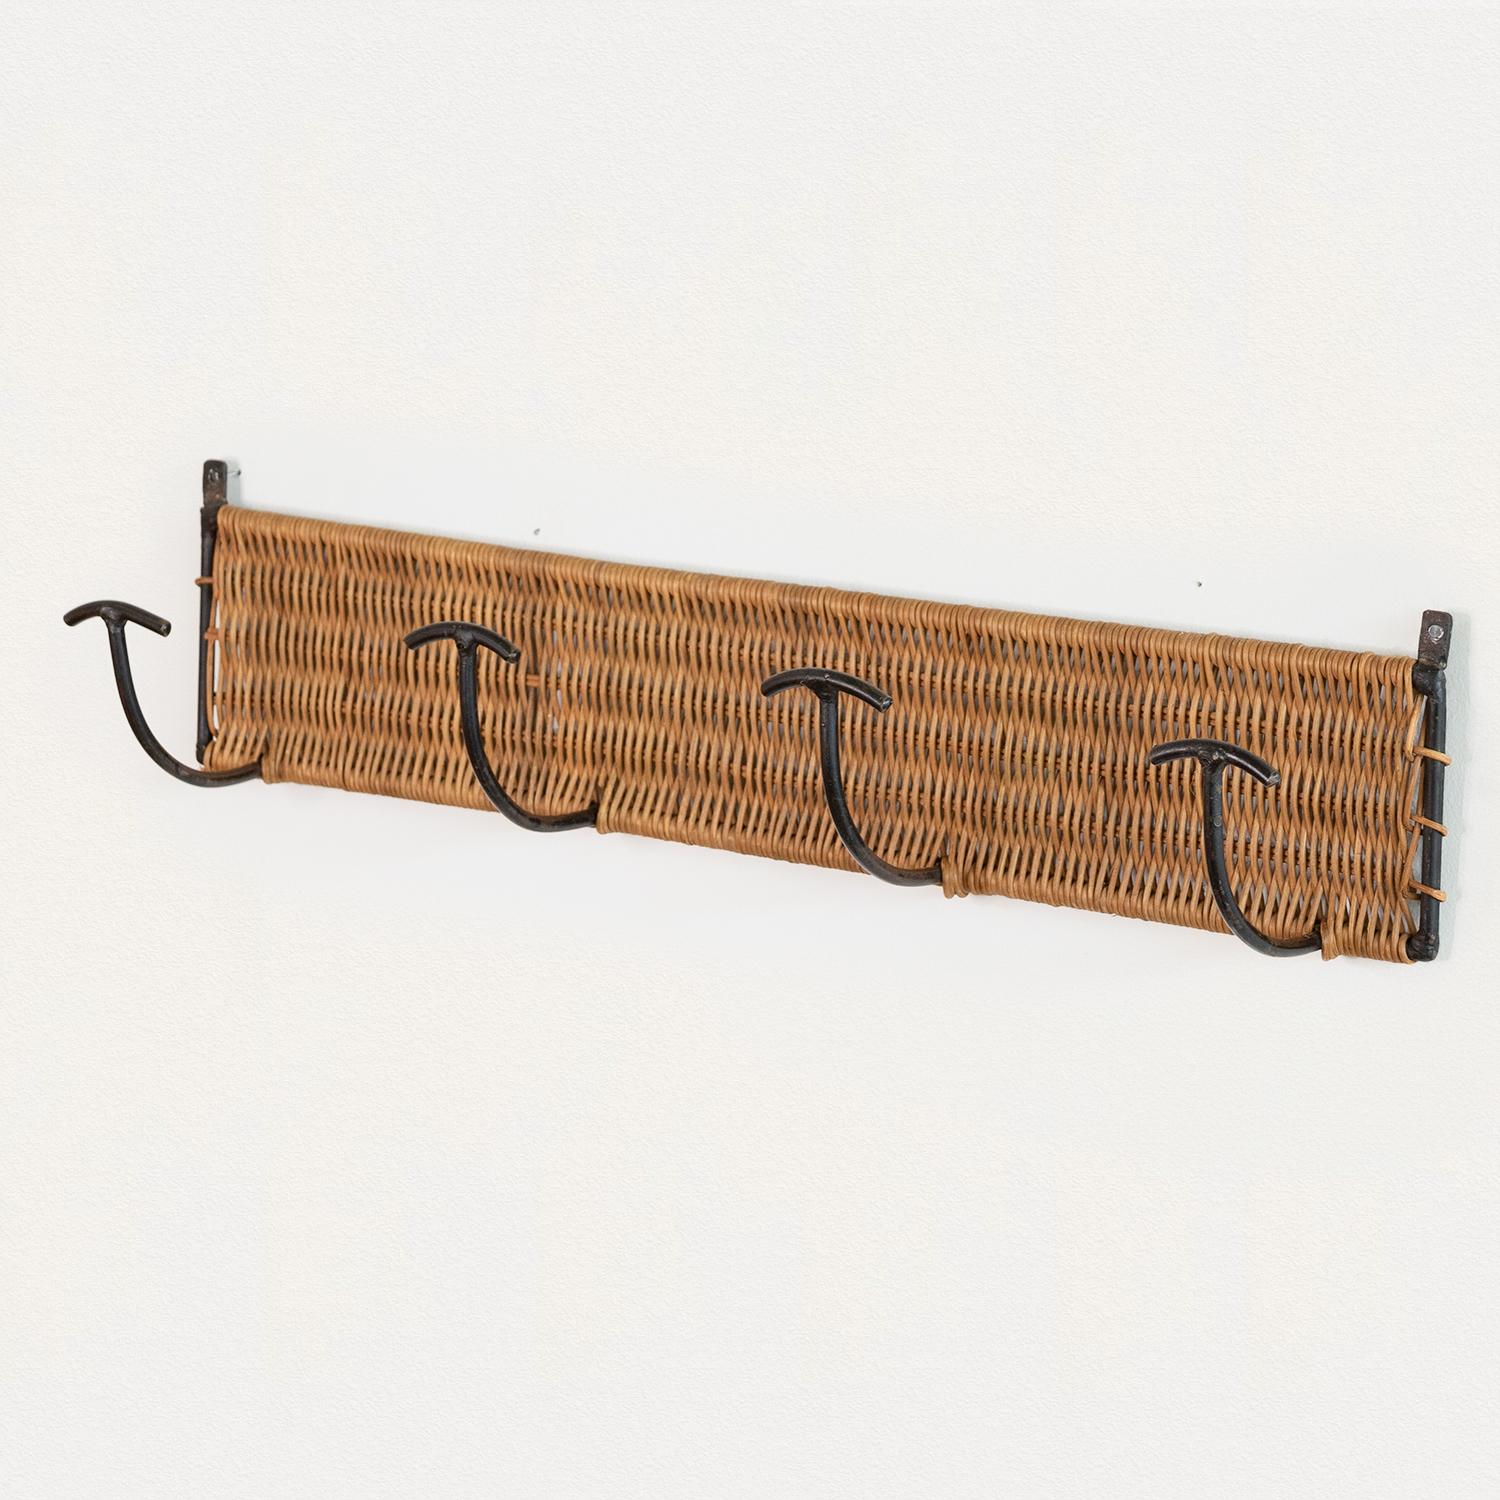 Vintage woven wicker wall rack with 4 iron hooks to hang coats or hats. Black painted iron and wicker is all original. Beautiful and functional piece from France, 1950s.